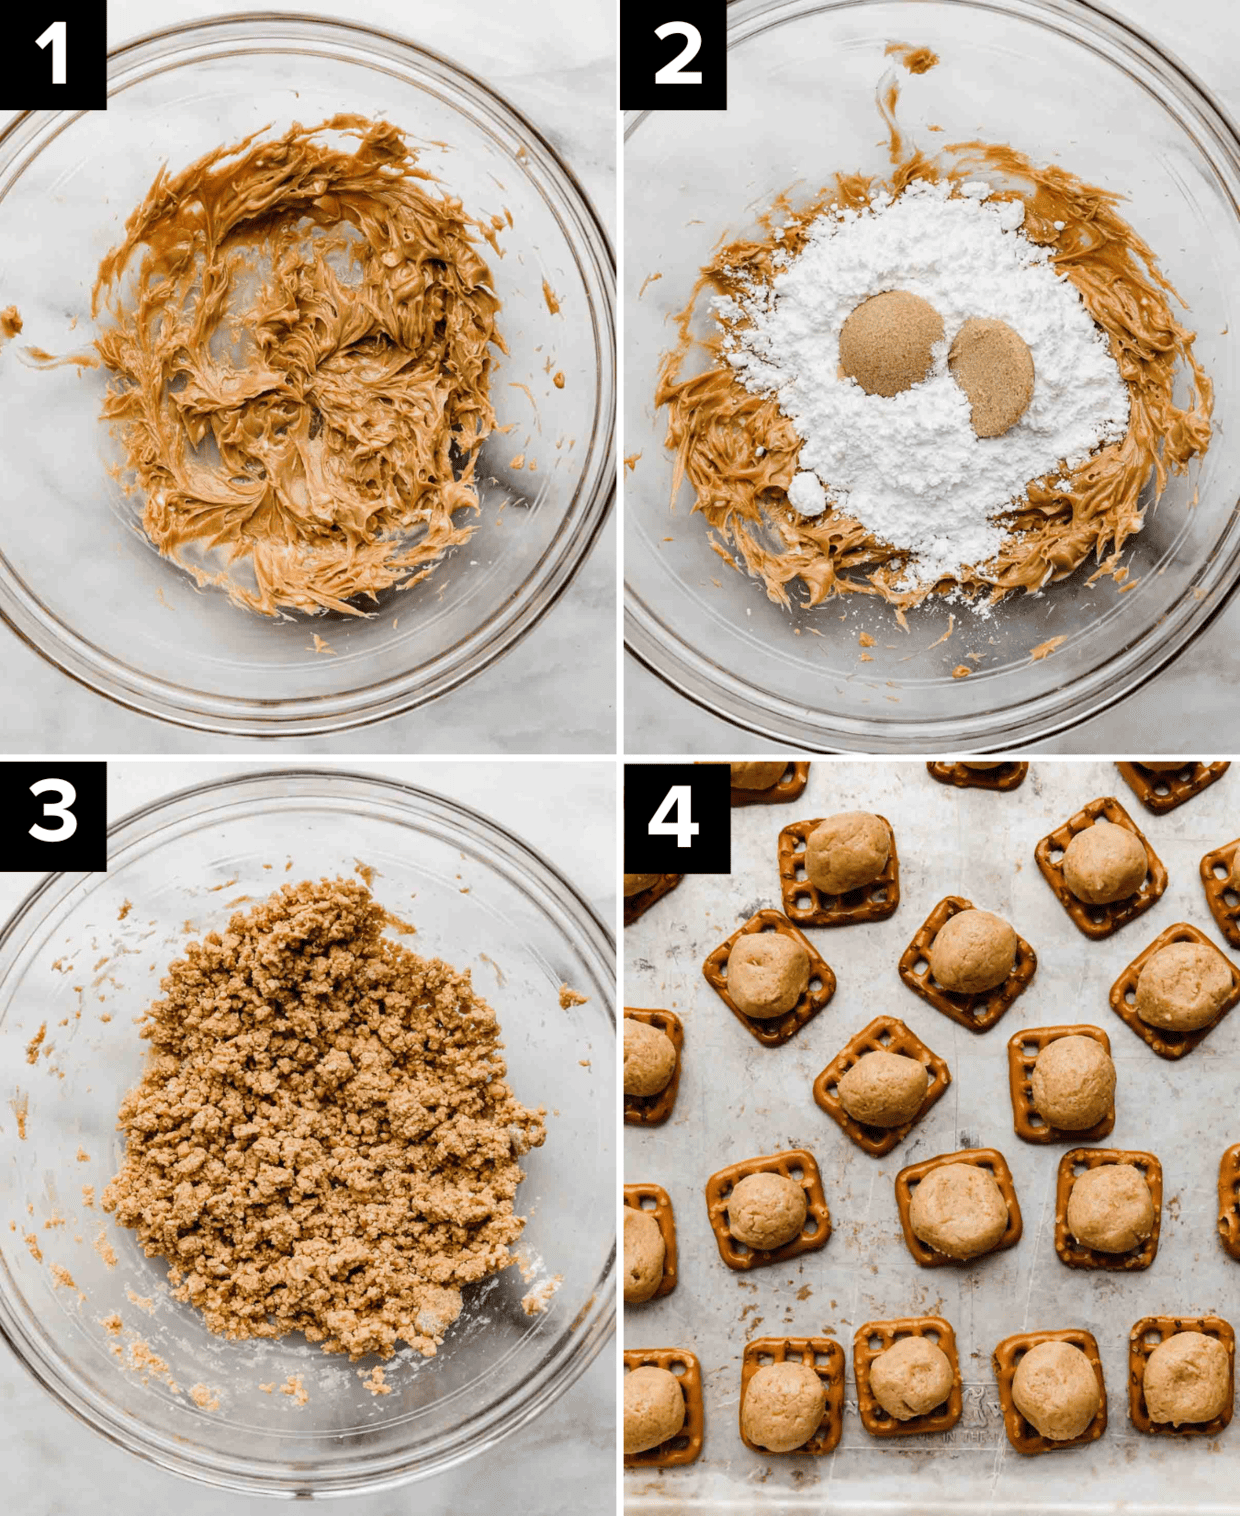 Four images showing the making of the peanut butter filling for Peanut Butter Pretzel Bites.